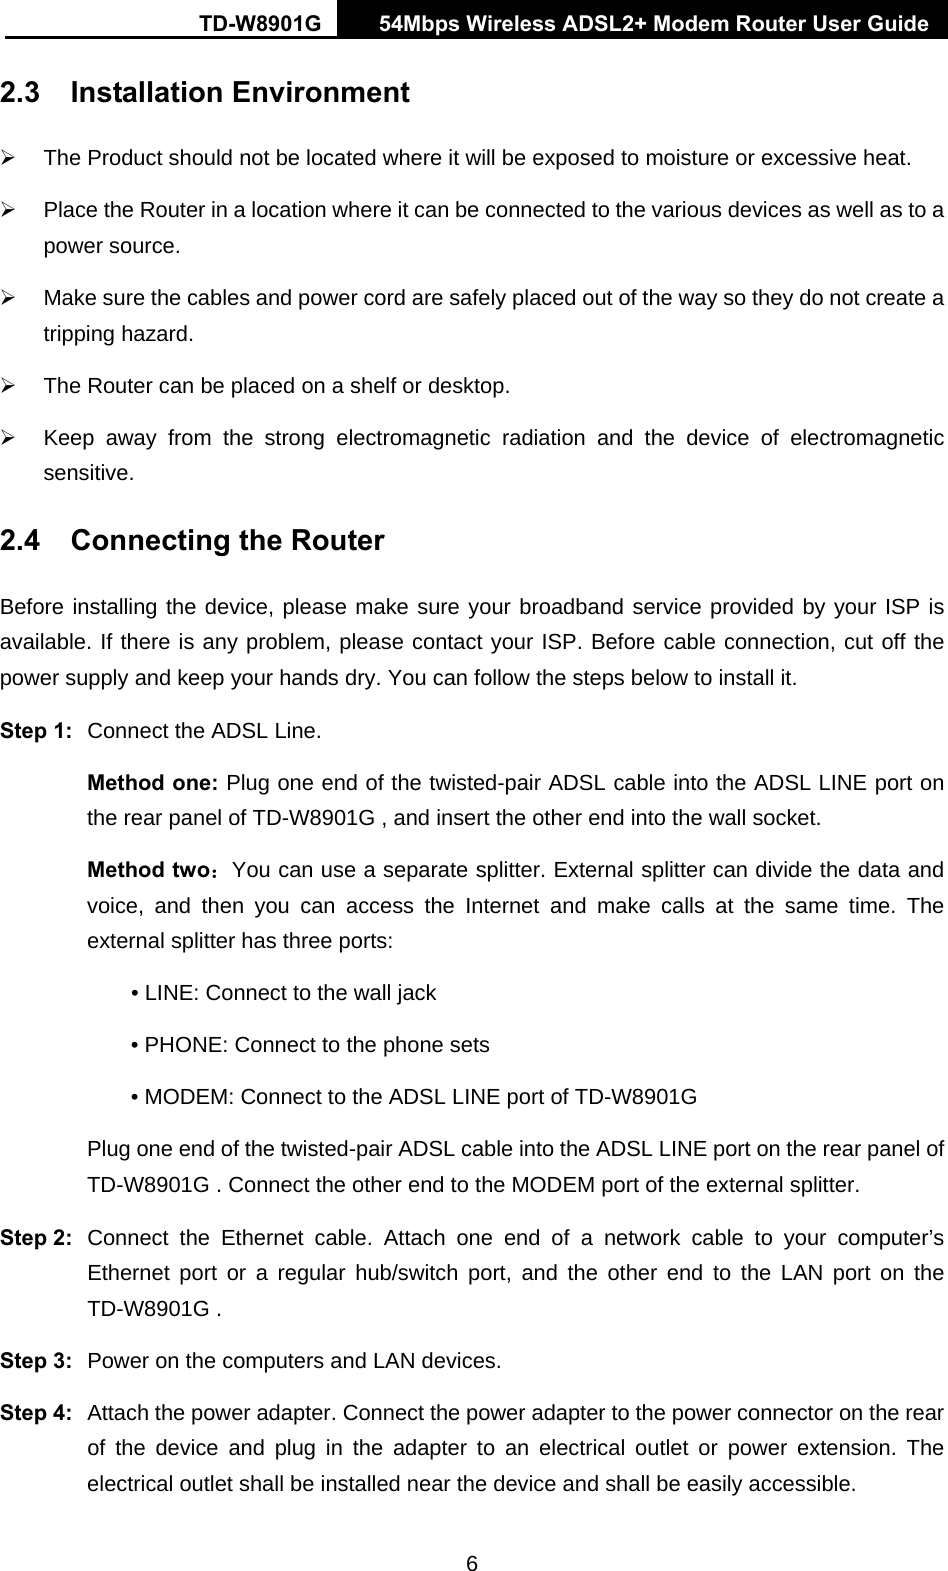 TD-W8901G   54Mbps Wireless ADSL2+ Modem Router User Guide 6 2.3 Installation Environment ¾  The Product should not be located where it will be exposed to moisture or excessive heat. ¾  Place the Router in a location where it can be connected to the various devices as well as to a power source. ¾  Make sure the cables and power cord are safely placed out of the way so they do not create a tripping hazard. ¾  The Router can be placed on a shelf or desktop. ¾  Keep away from the strong electromagnetic radiation and the device of electromagnetic sensitive. 2.4  Connecting the Router Before installing the device, please make sure your broadband service provided by your ISP is available. If there is any problem, please contact your ISP. Before cable connection, cut off the power supply and keep your hands dry. You can follow the steps below to install it. Step 1:  Connect the ADSL Line. Method one: Plug one end of the twisted-pair ADSL cable into the ADSL LINE port on the rear panel of TD-W8901G , and insert the other end into the wall socket. Method two：You can use a separate splitter. External splitter can divide the data and voice, and then you can access the Internet and make calls at the same time. The external splitter has three ports: • LINE: Connect to the wall jack • PHONE: Connect to the phone sets • MODEM: Connect to the ADSL LINE port of TD-W8901G   Plug one end of the twisted-pair ADSL cable into the ADSL LINE port on the rear panel of TD-W8901G . Connect the other end to the MODEM port of the external splitter. Step 2:  Connect the Ethernet cable. Attach one end of a network cable to your computer’s Ethernet port or a regular hub/switch port, and the other end to the LAN port on the TD-W8901G . Step 3:  Power on the computers and LAN devices. Step 4:  Attach the power adapter. Connect the power adapter to the power connector on the rear of the device and plug in the adapter to an electrical outlet or power extension. The electrical outlet shall be installed near the device and shall be easily accessible. 